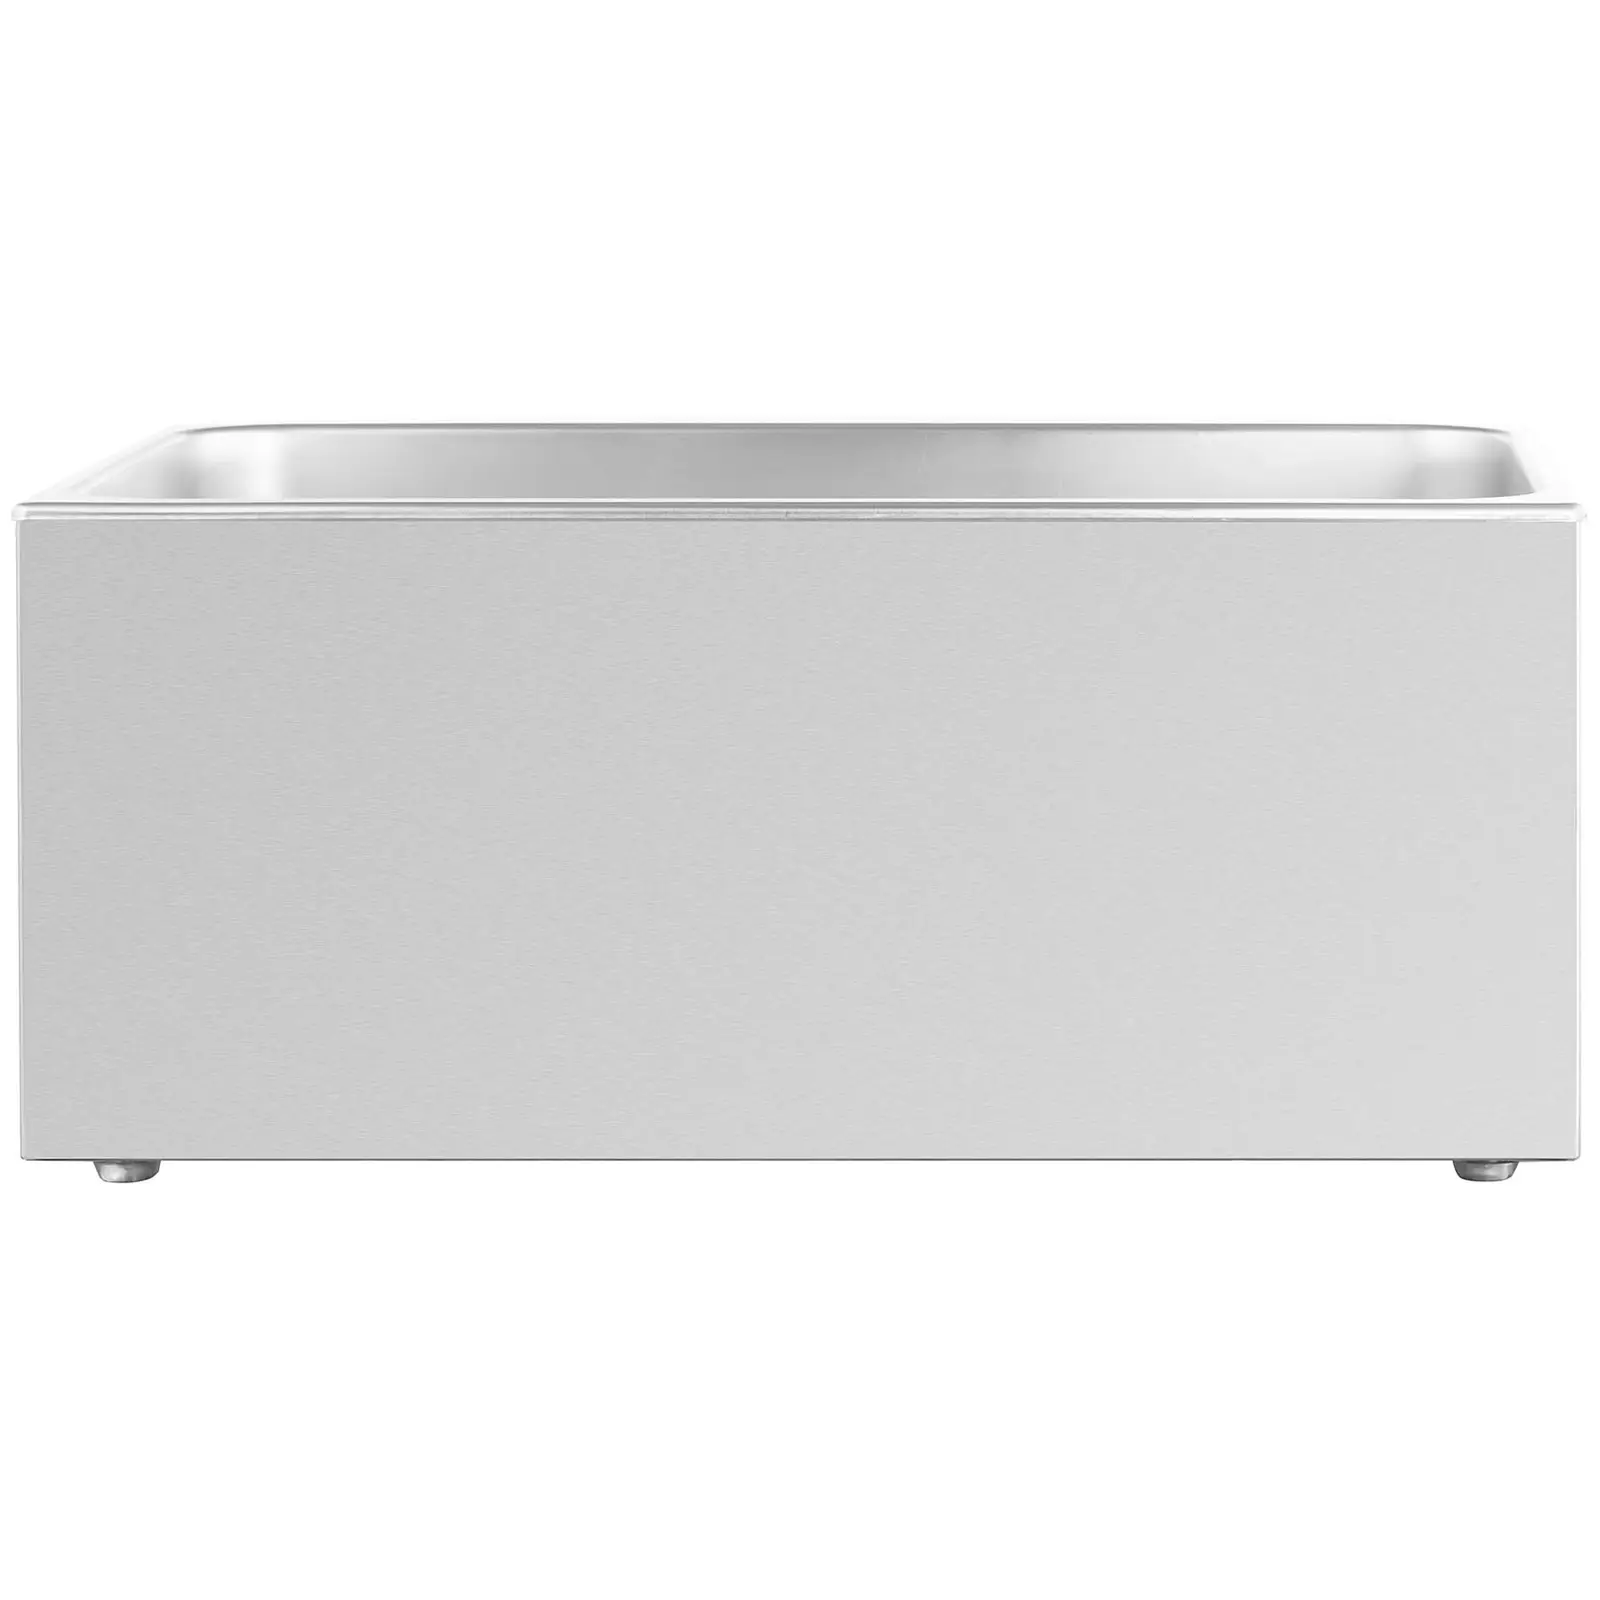 Bain Marie - 640 W - GN 1/1 - ohne Behälter - Royal Catering